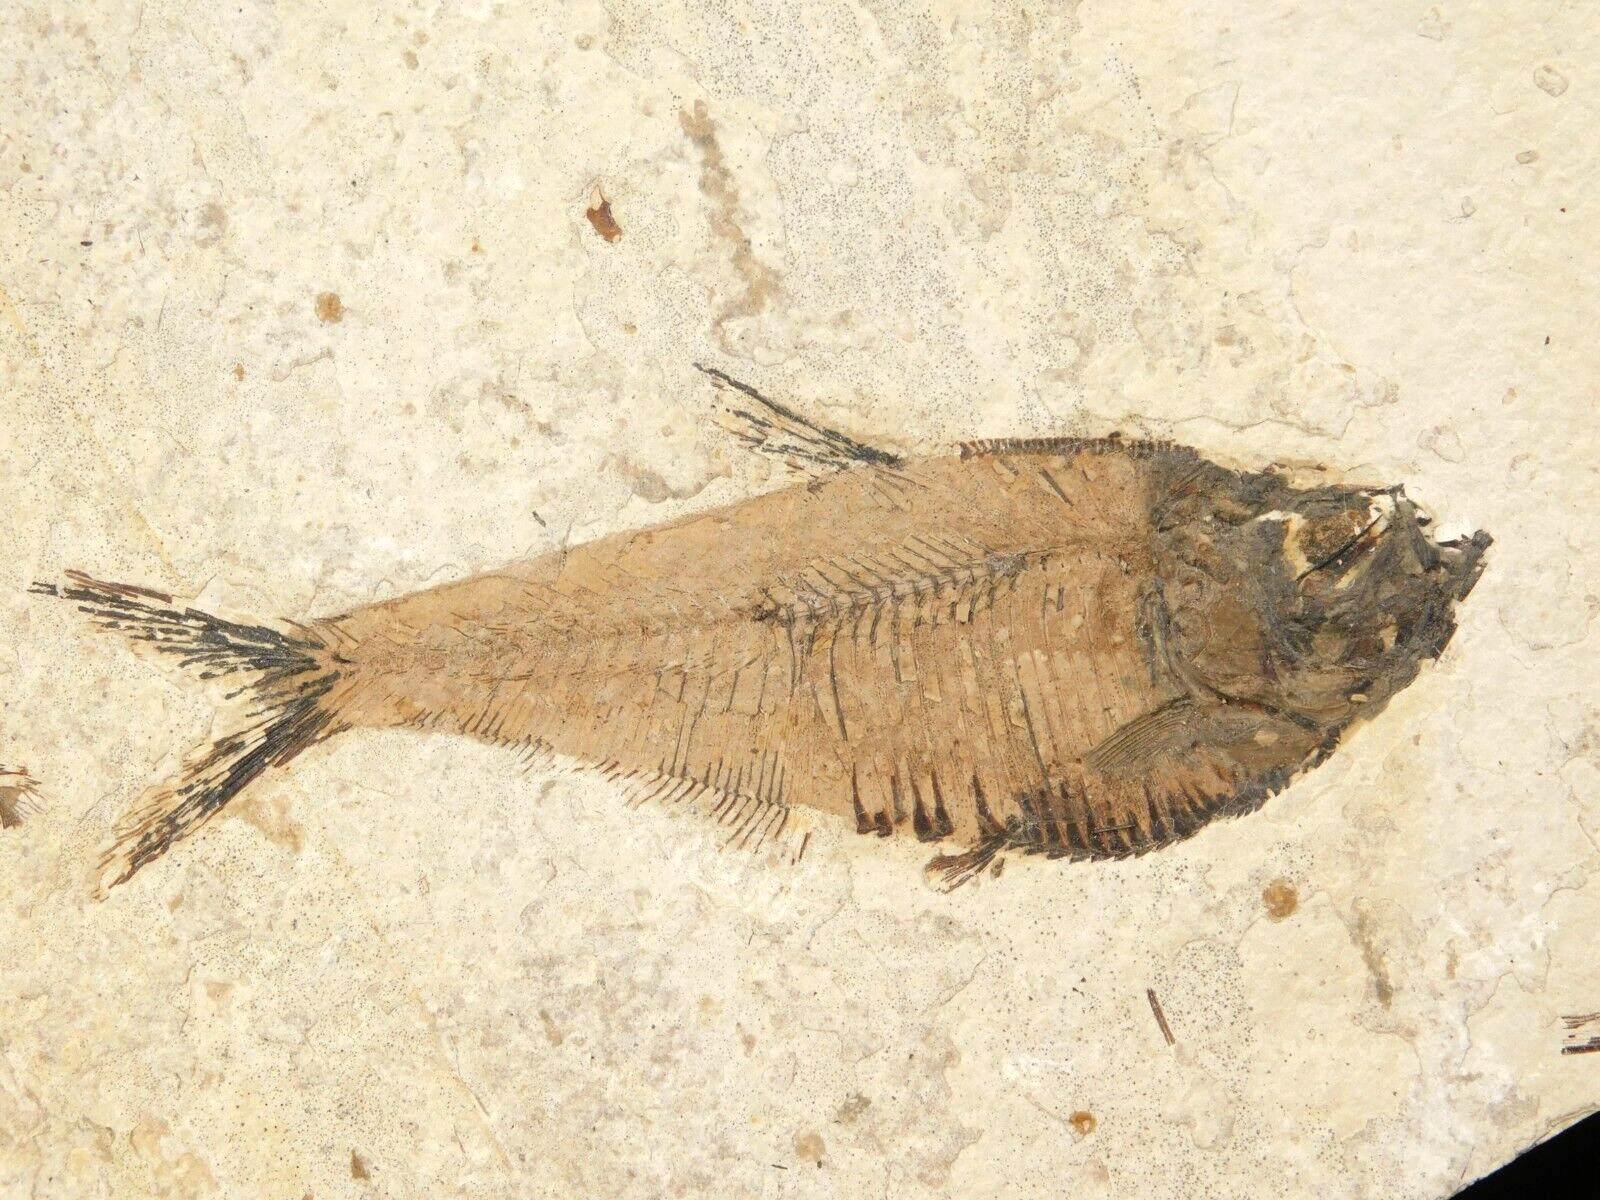 50 Million Year Old Diplomystus FISH Fossil With Stand From Wyoming 271gr